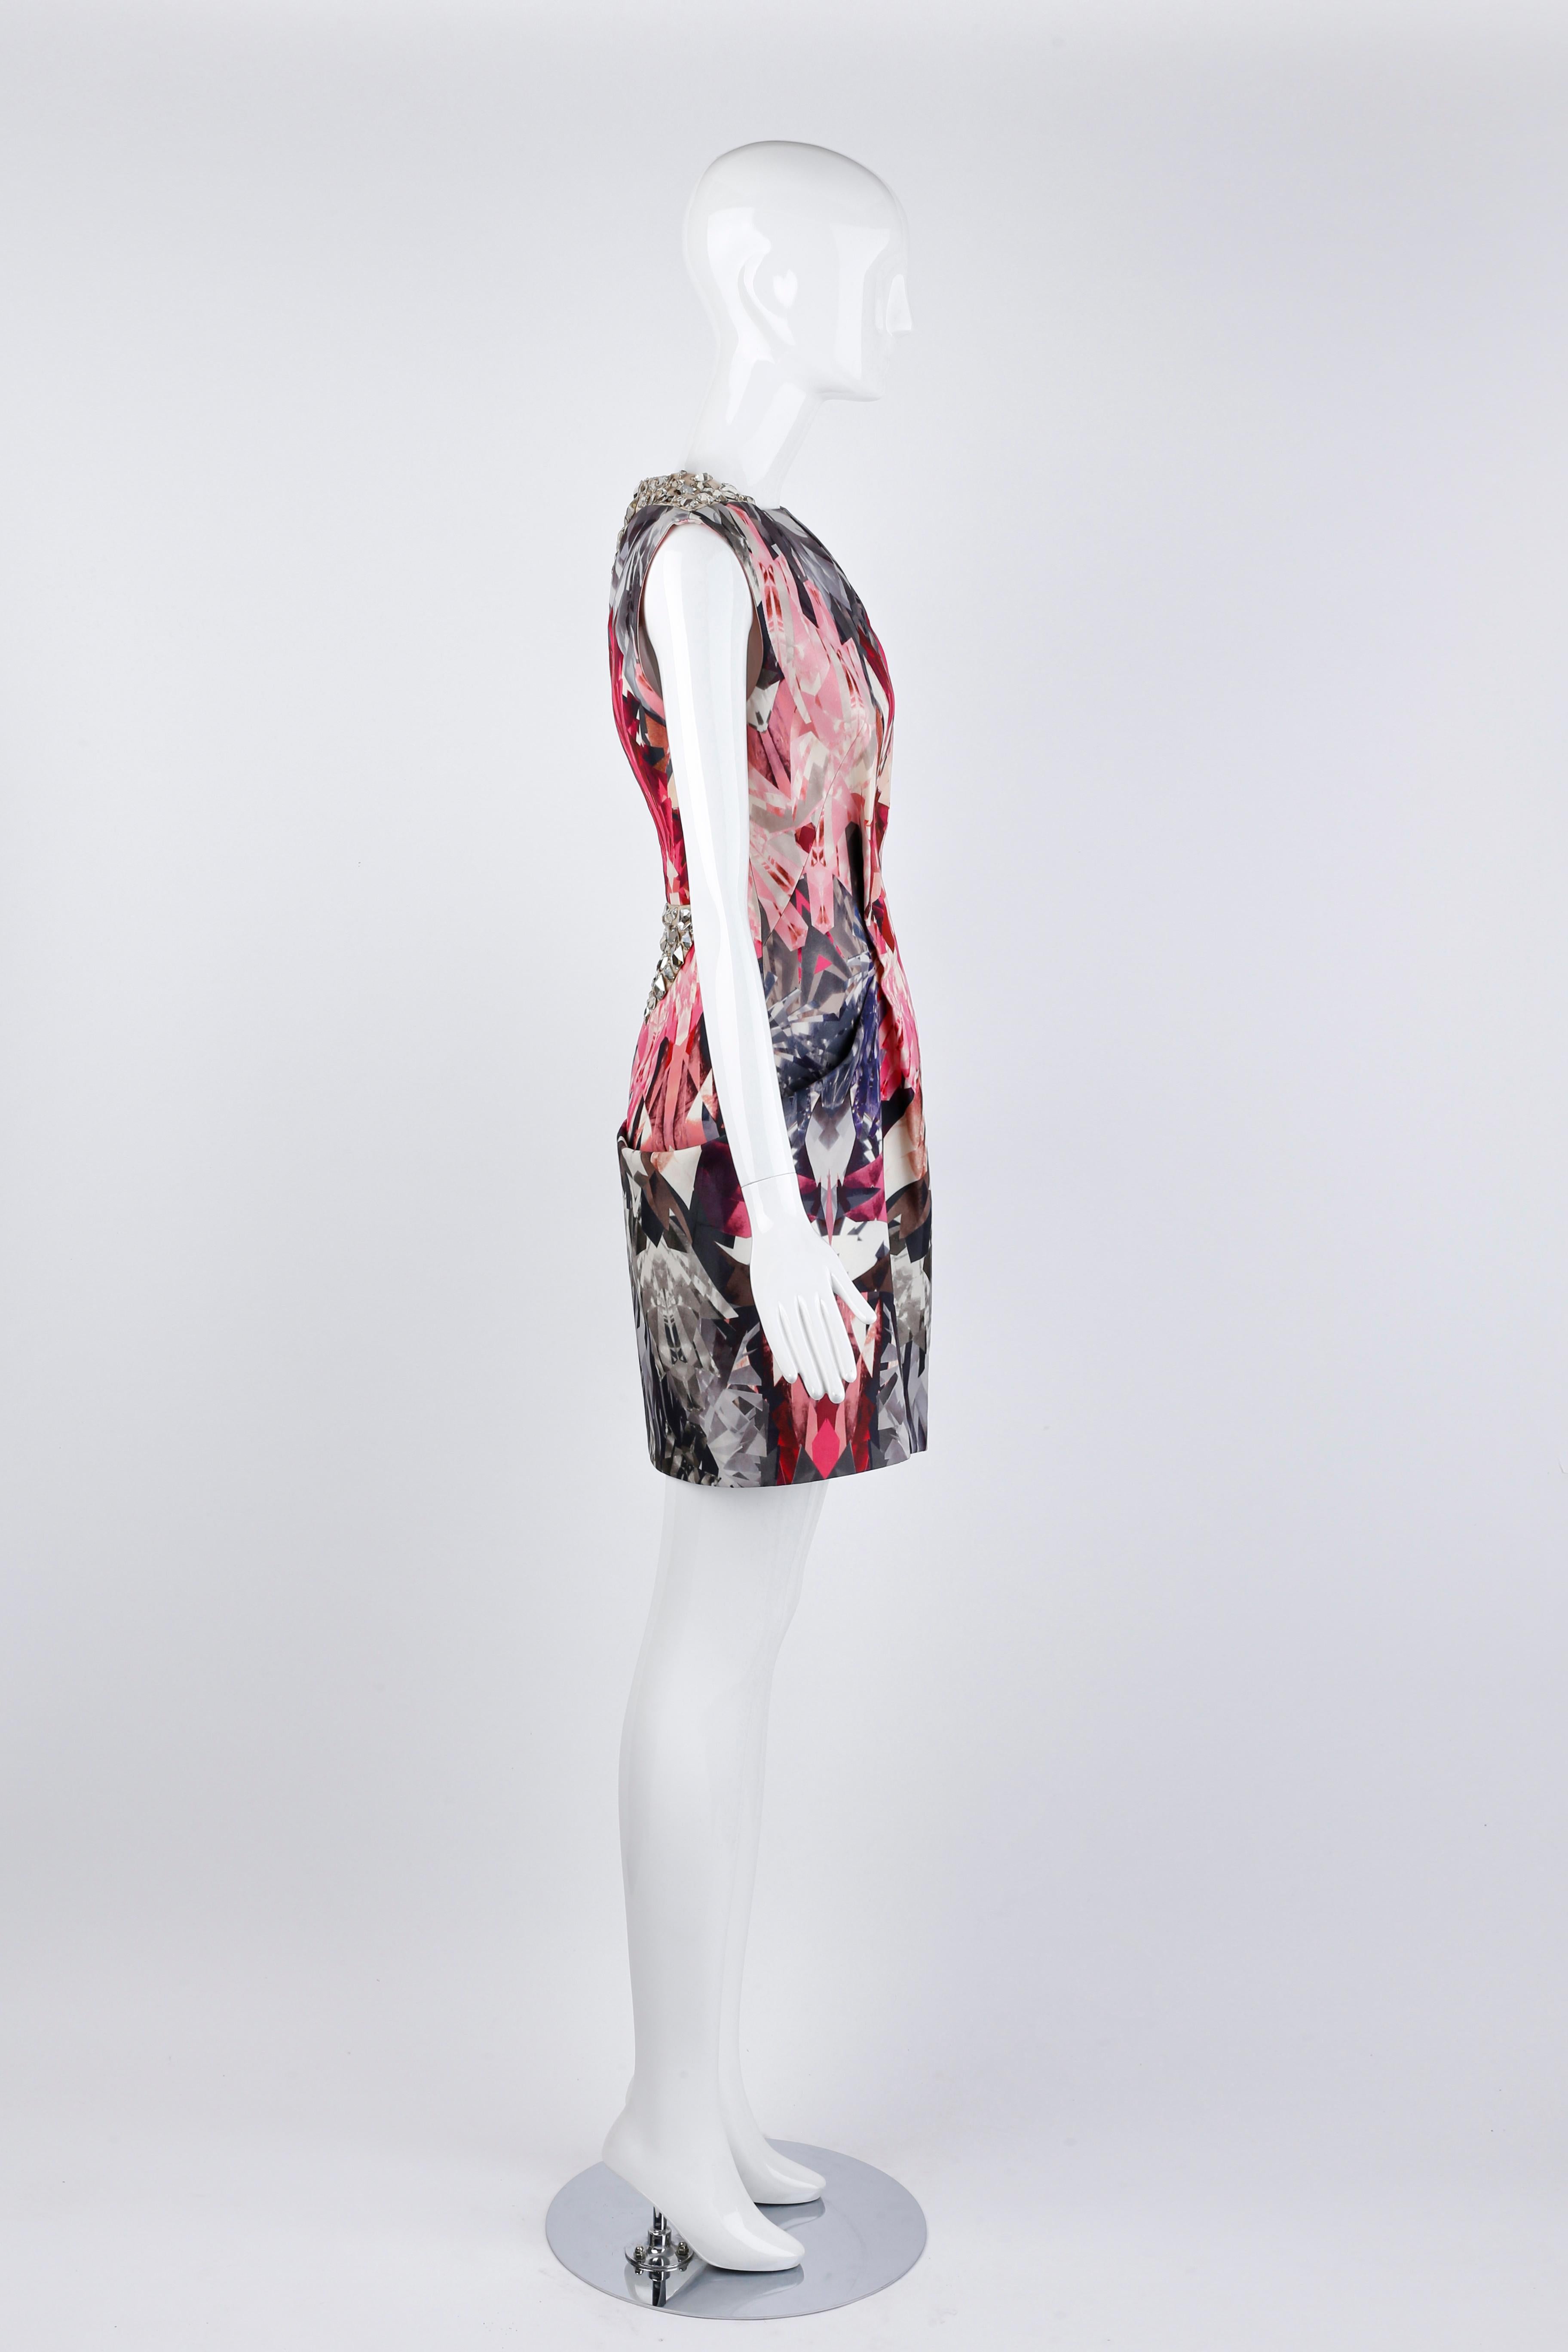 Alexander McQueen S/S 2009 Swarovski Crystal Structured Kaleidoscope Mini Dress In Good Condition For Sale In Chicago, IL